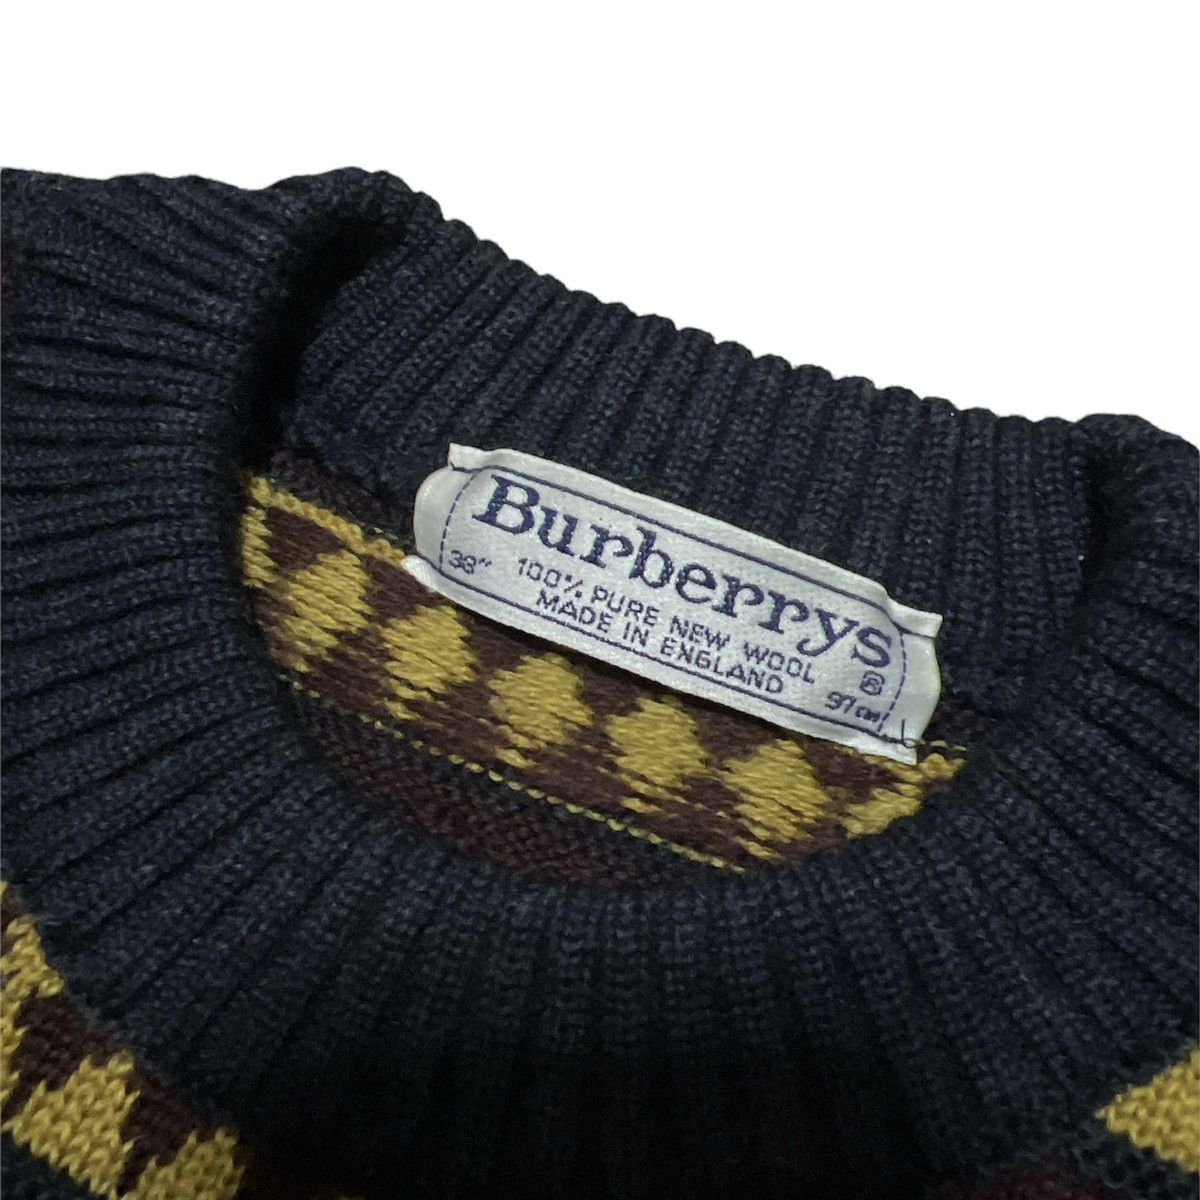 Vintage Burberrys embroidered knit sweater - 3